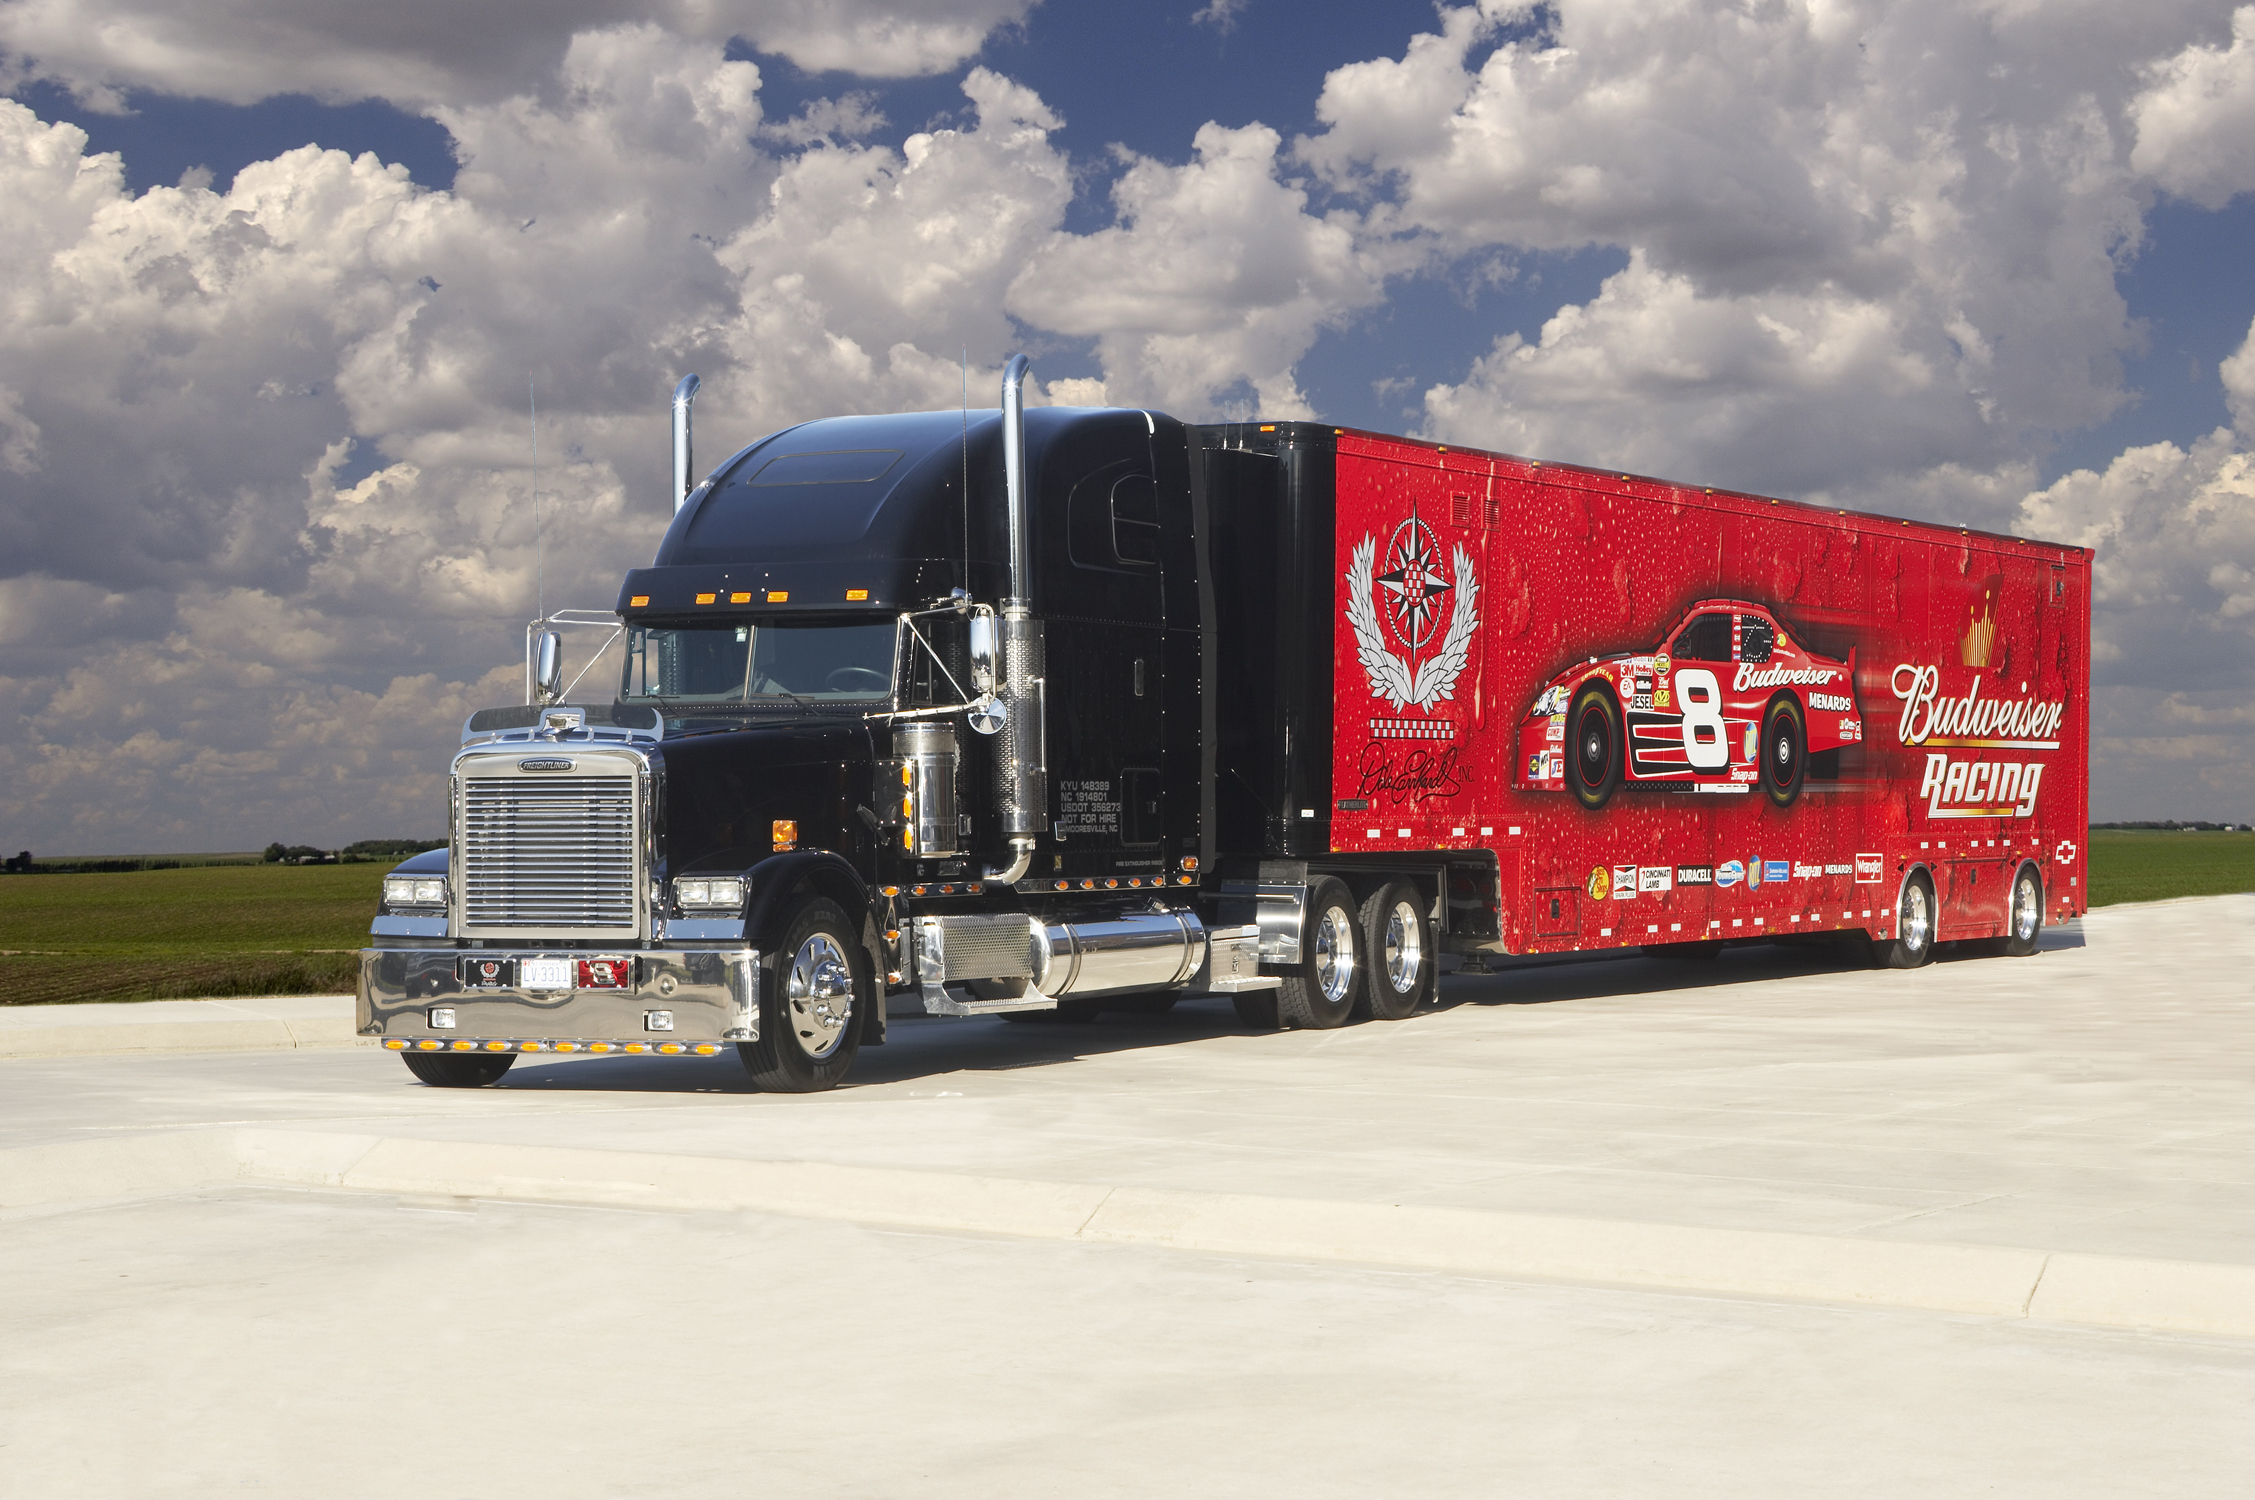 NASCAR haulers: How do these 18-wheelers transport race cars and more